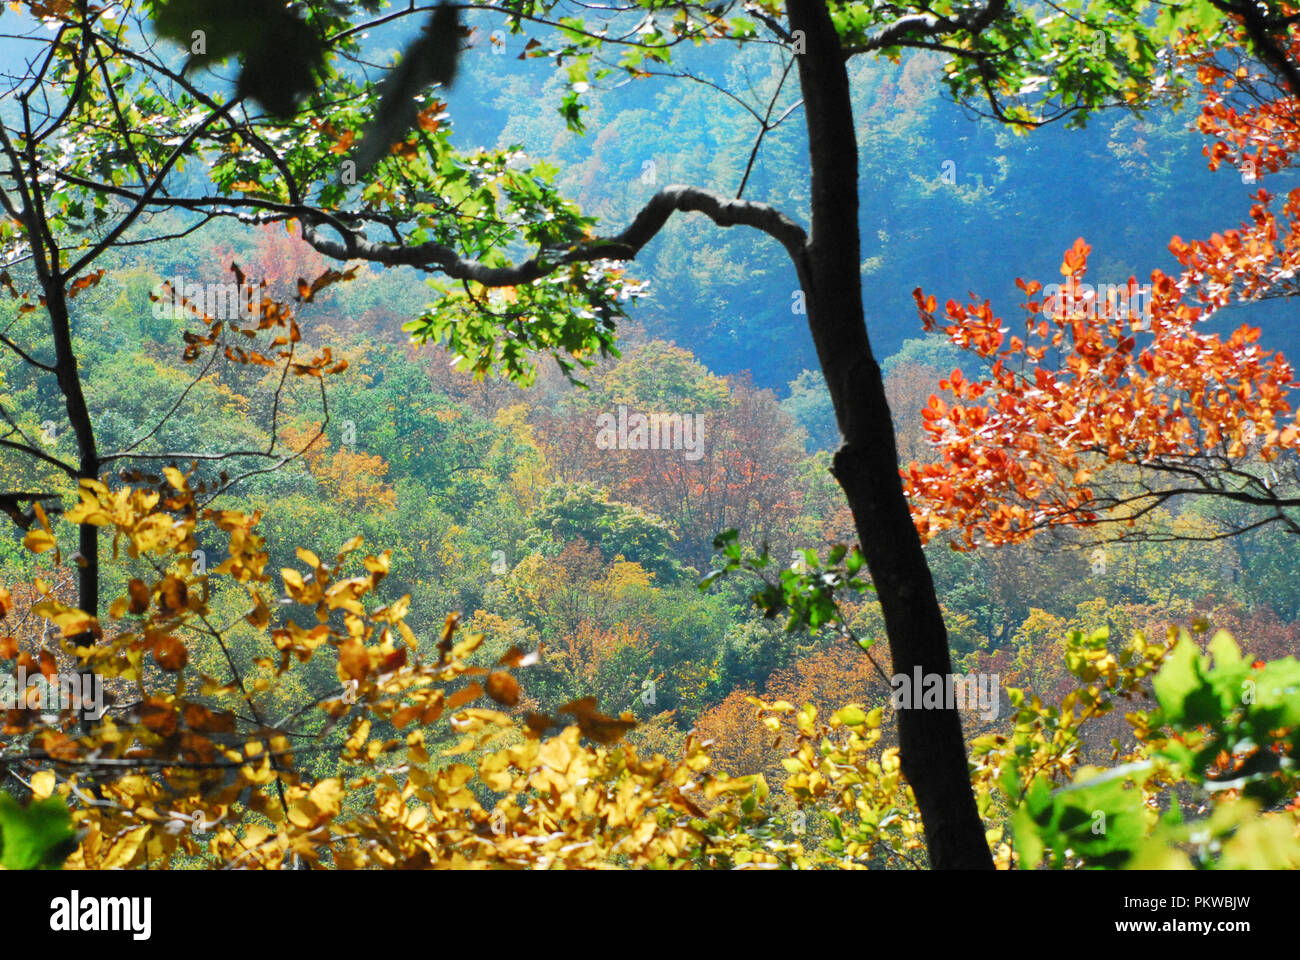 A stunning view over a valley of beautifully colorful fall leaves.  Note the 3 D effect of the close up leaves complimenting those in the distance. Stock Photo